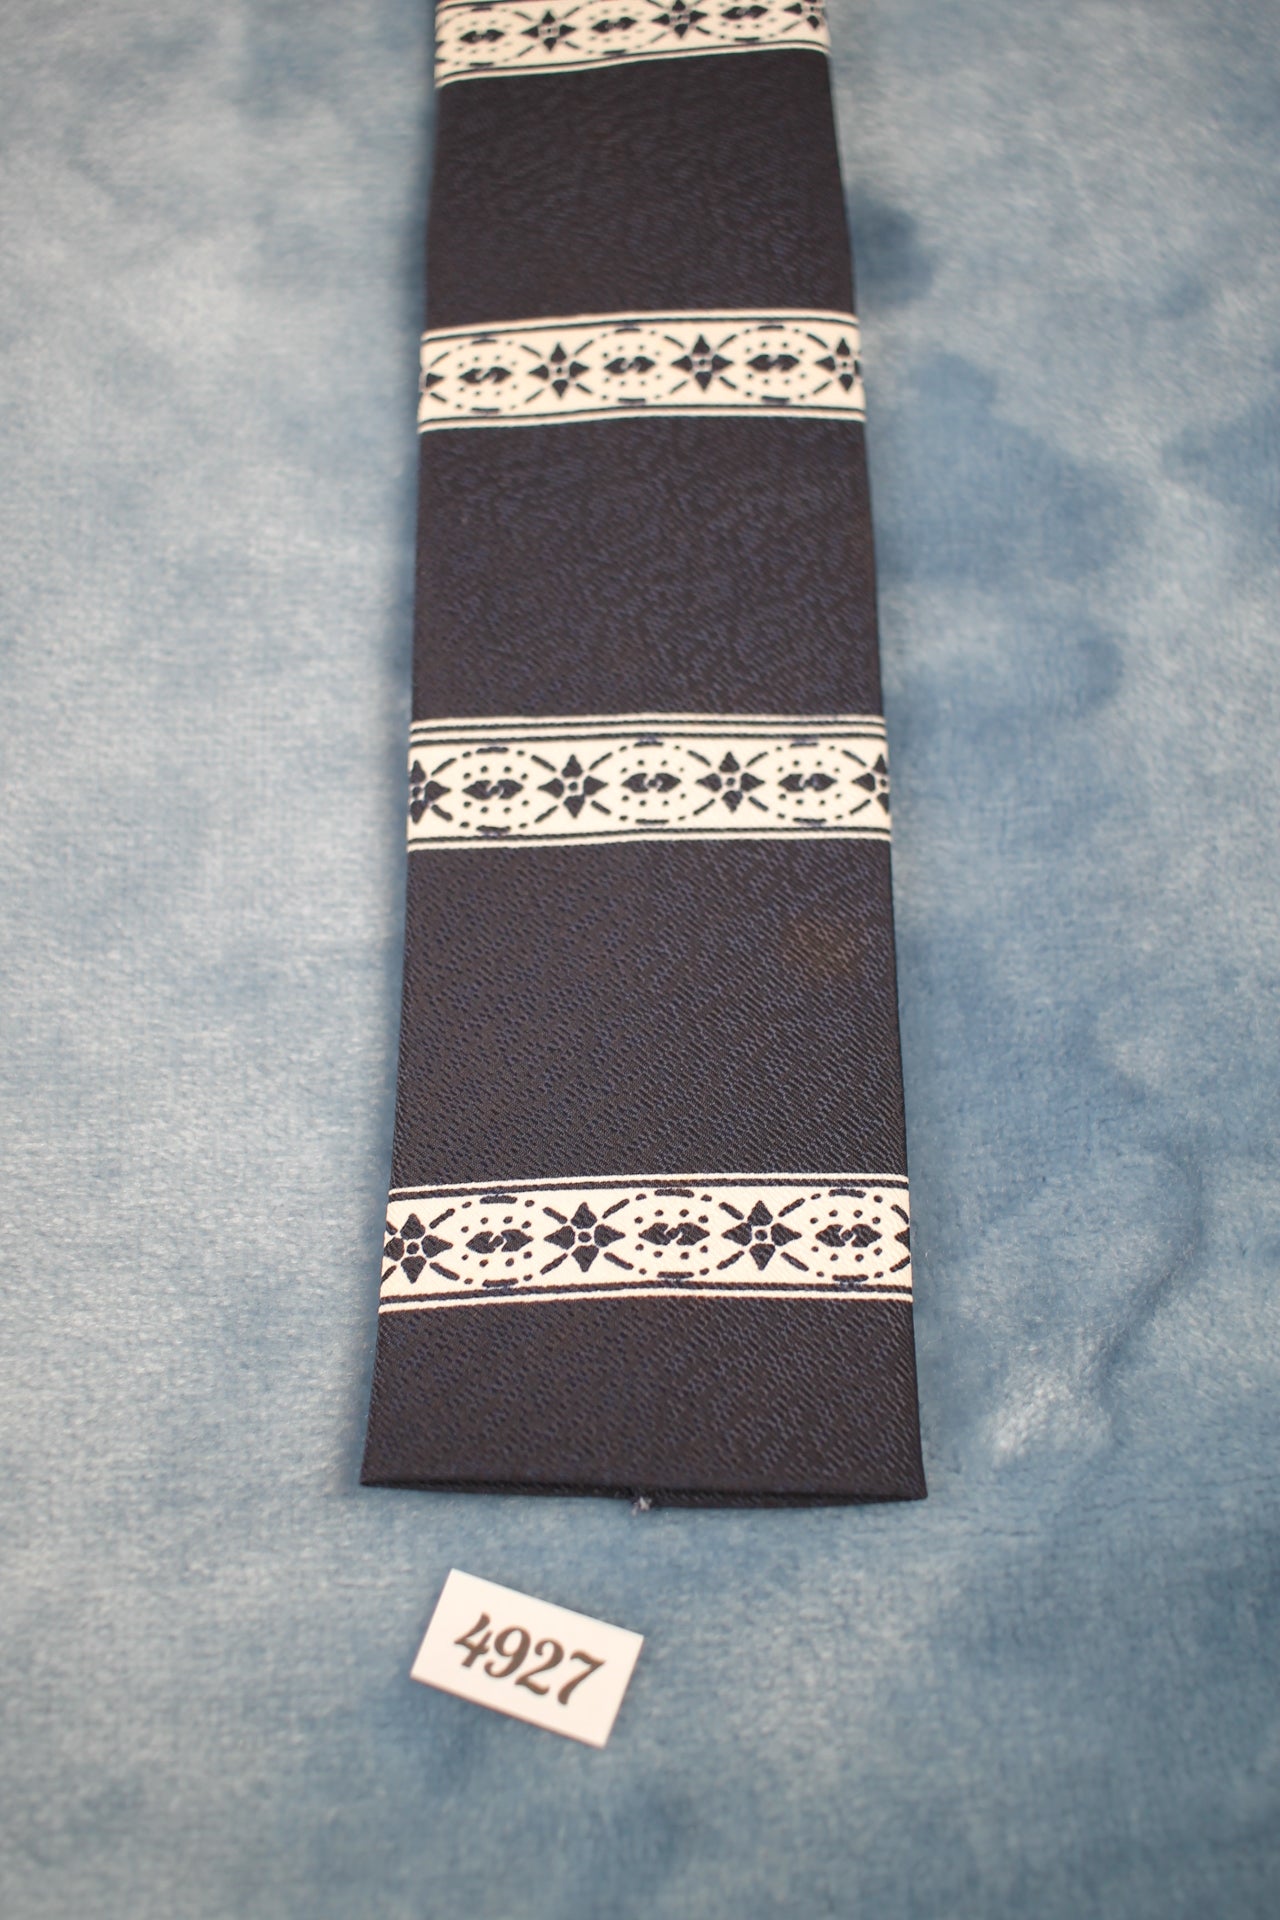 Vintage Lord Harcount Dark Blue White Pattern Square cut Skinny Tie 1940s/50s